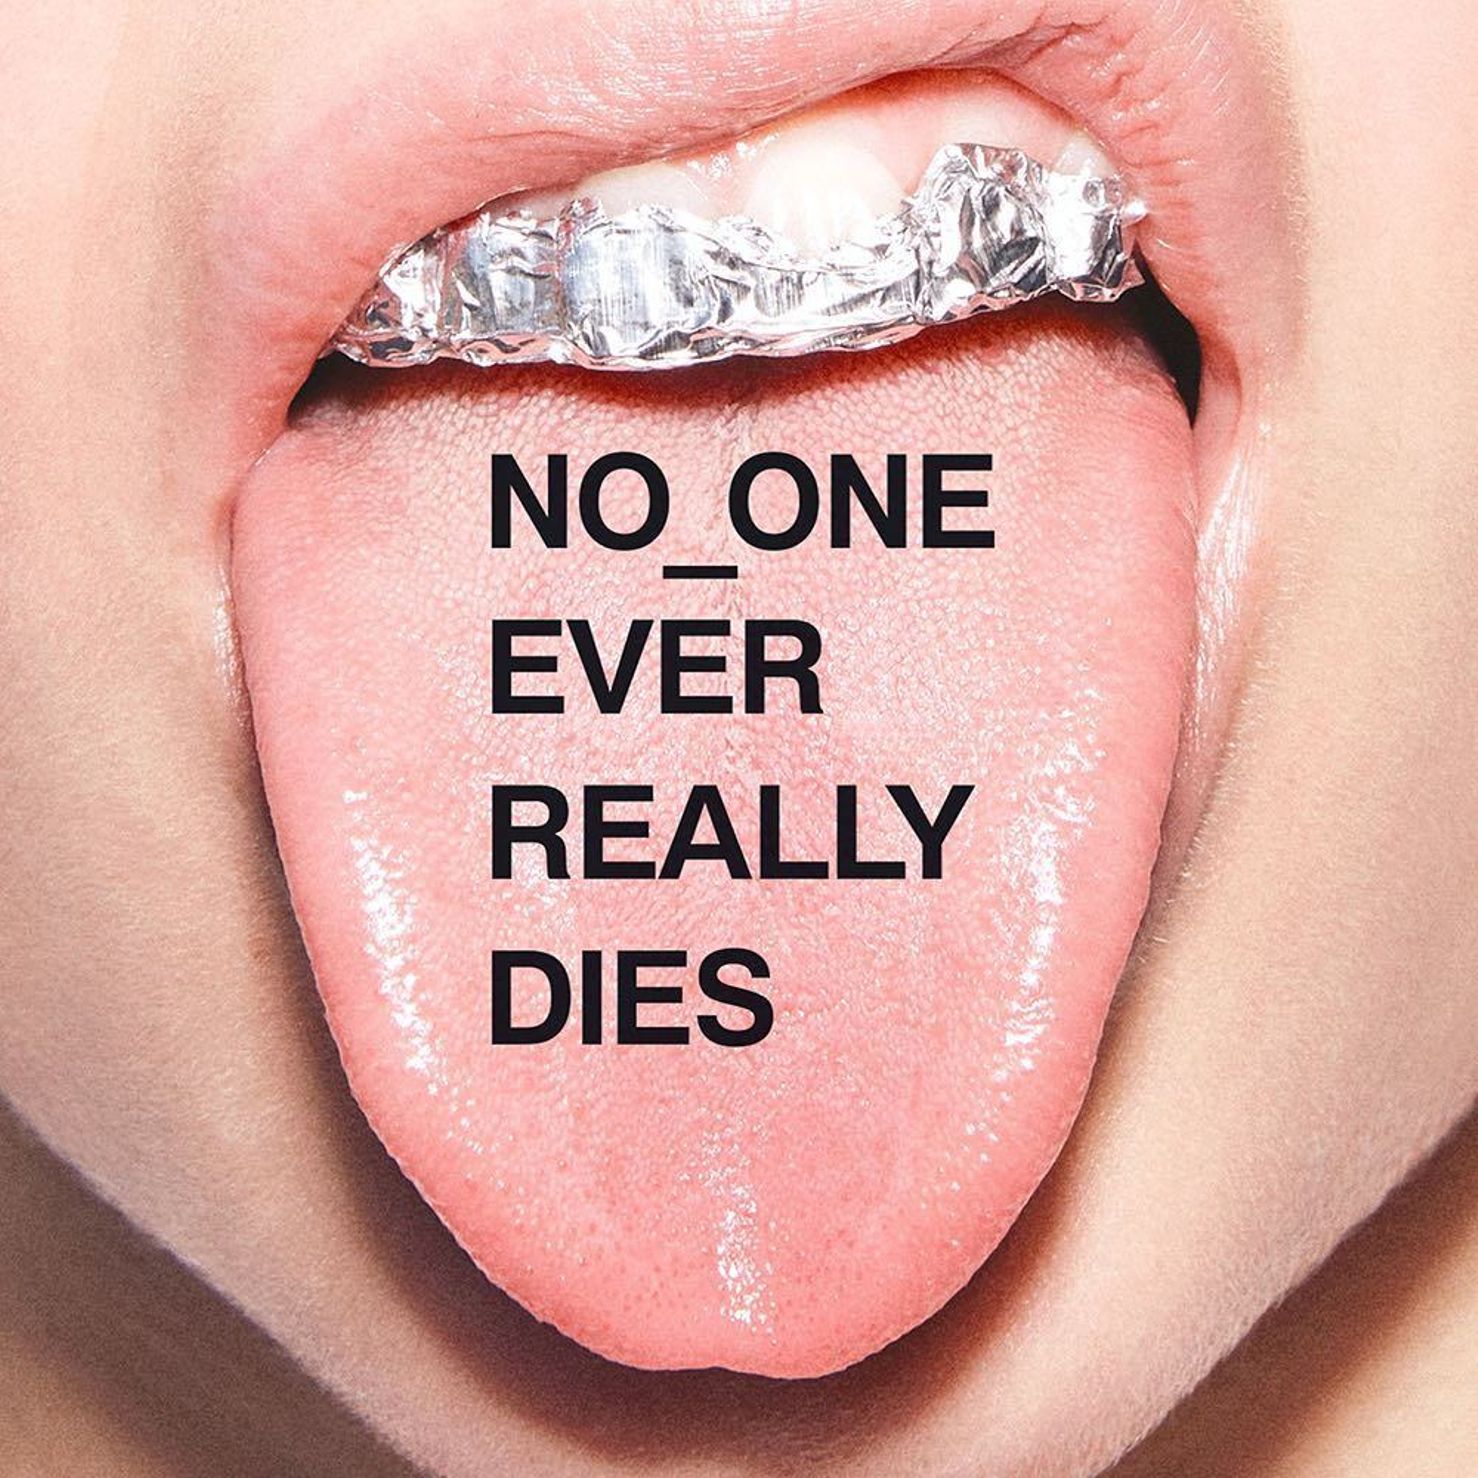 STEADY BUMPIN’: NO_ONE EVER REALLY DIES